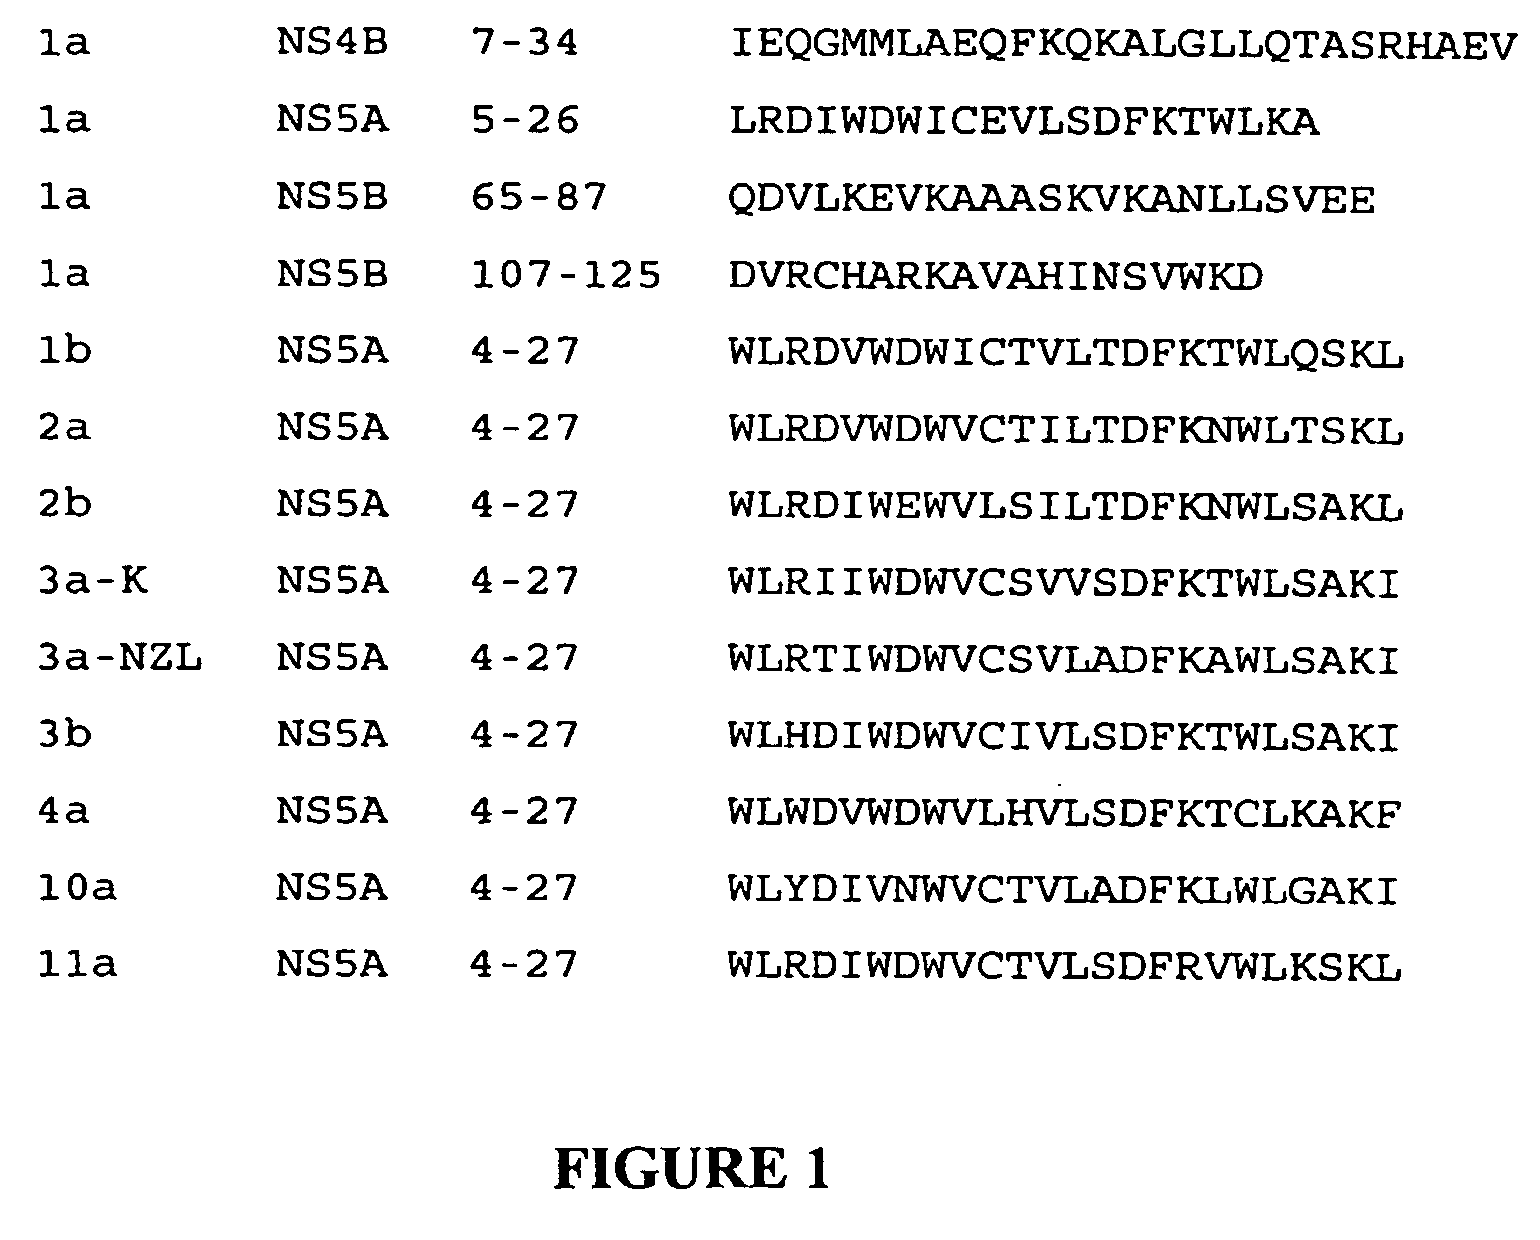 Agents for treatment of HCV and methods of use